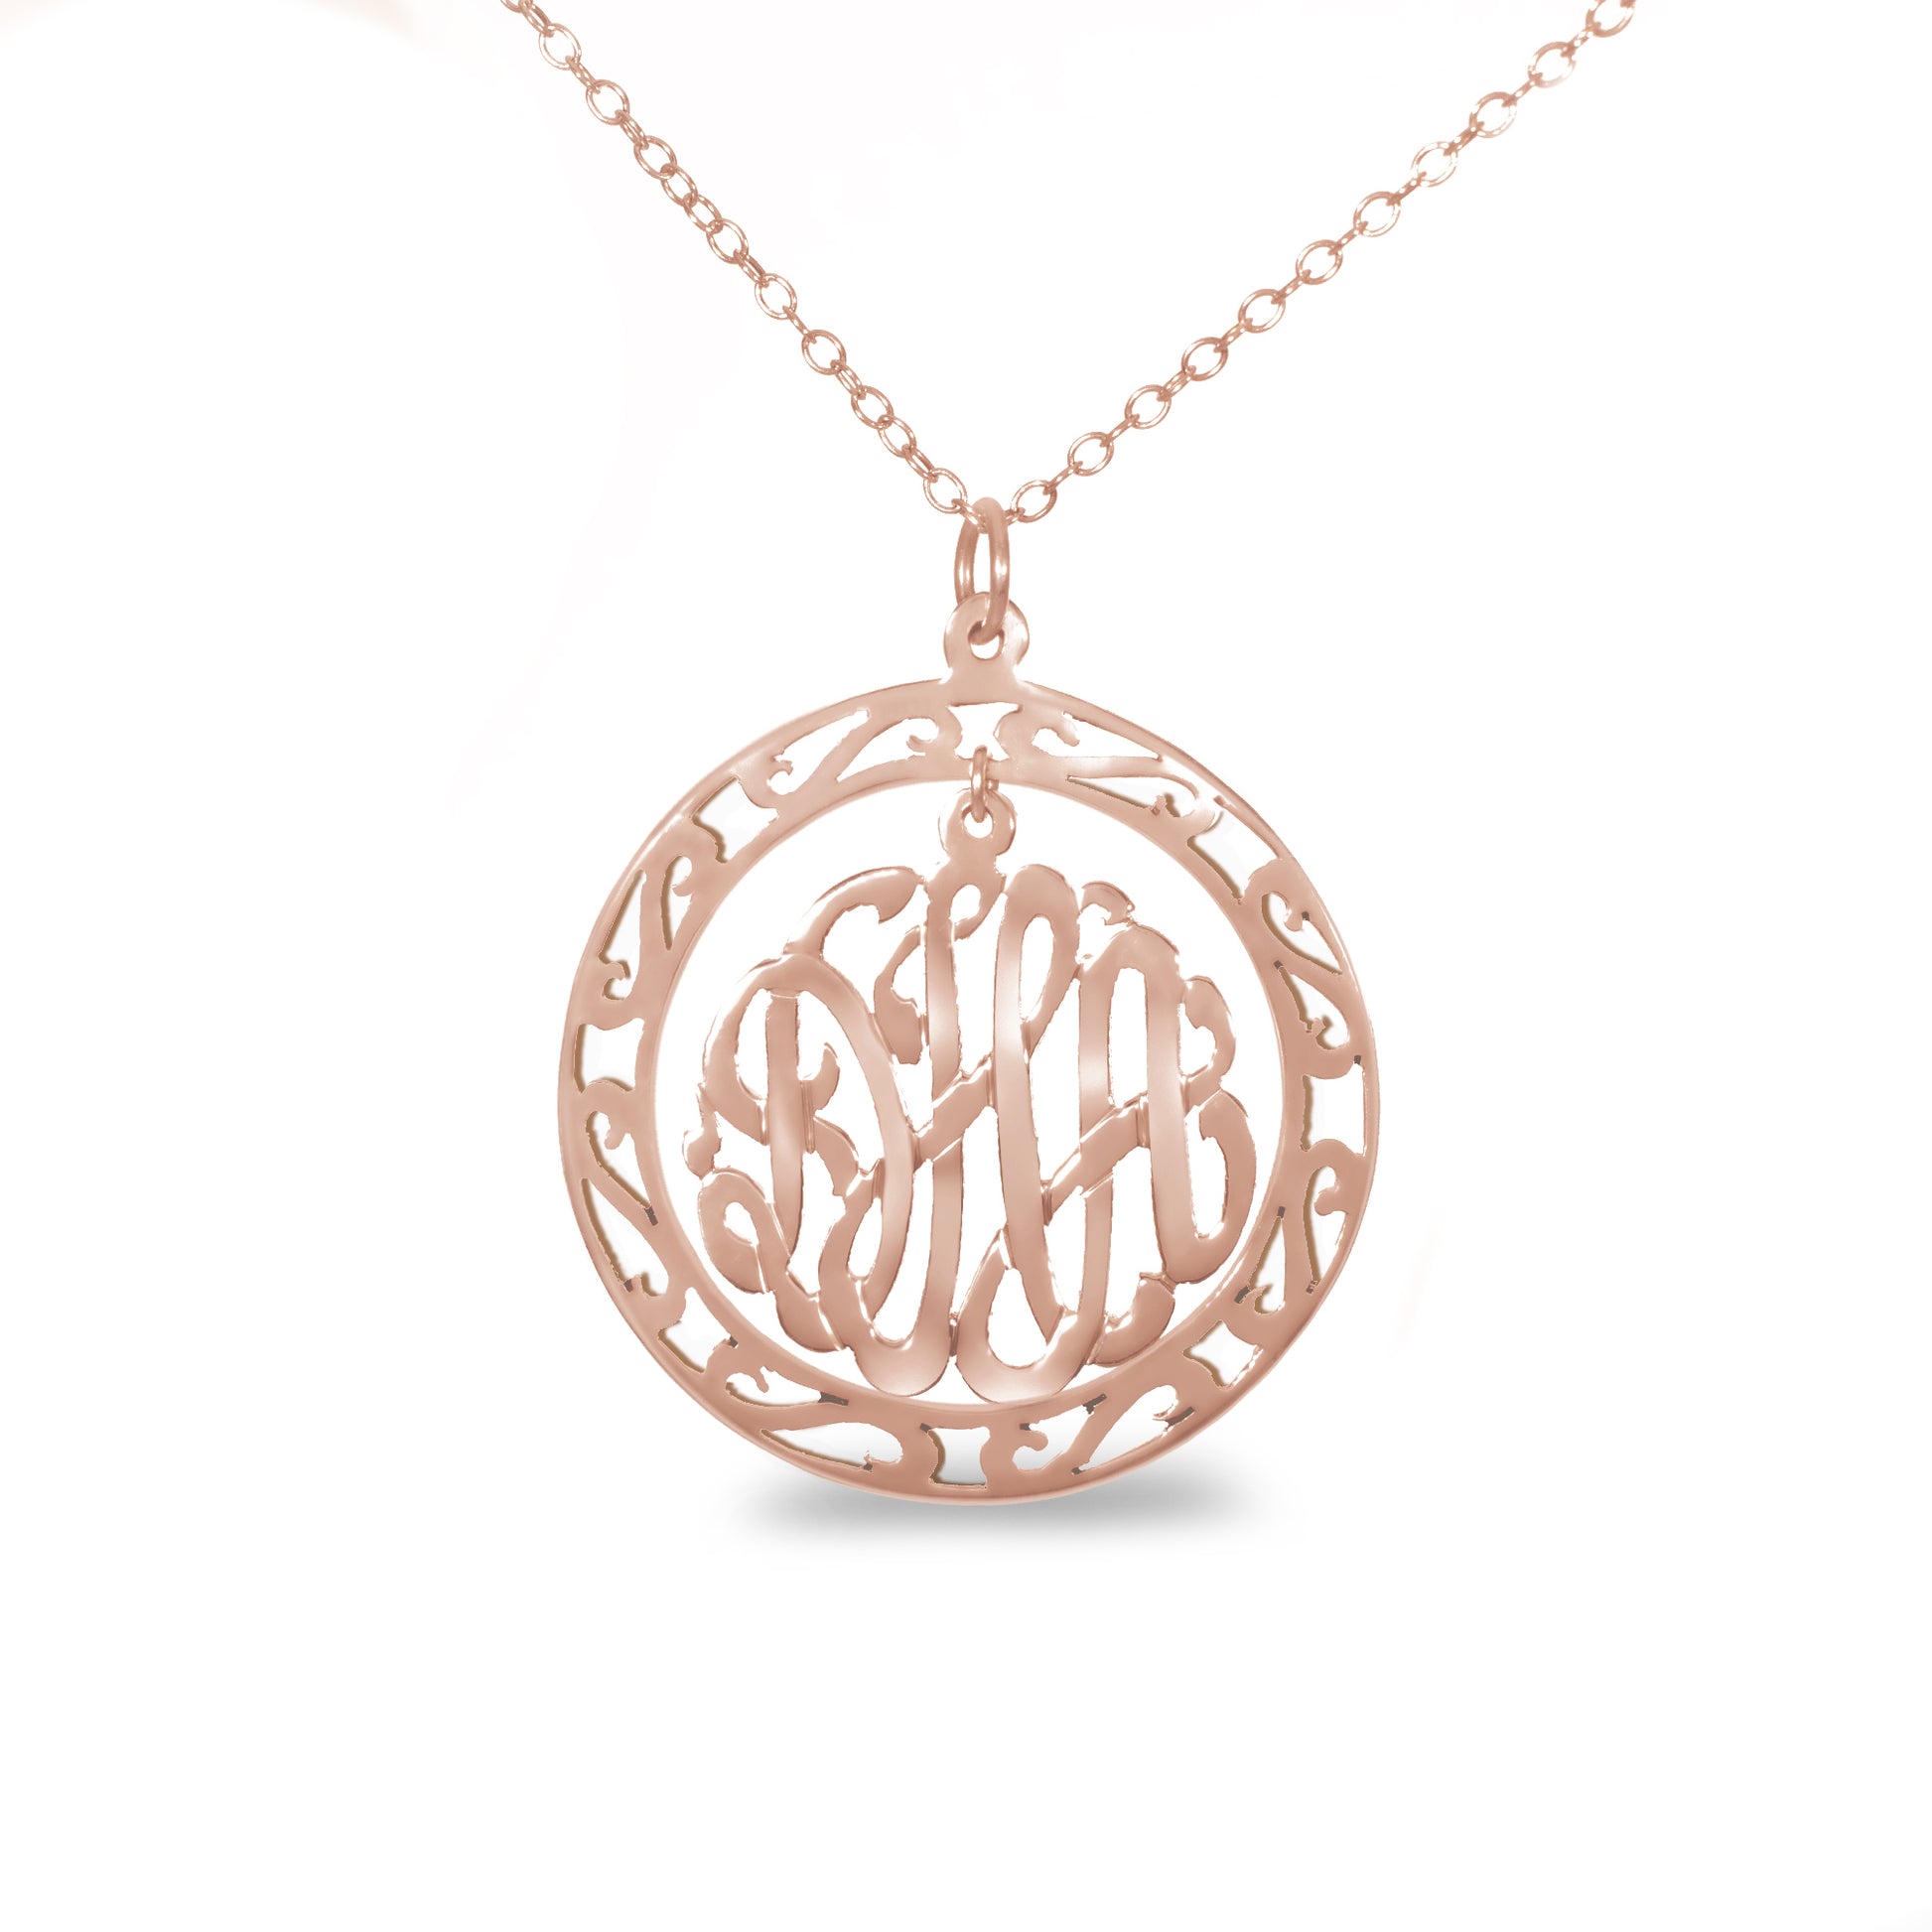 rose gold-plated silver round monogram necklace hanging inside a hollow teardrop pendant